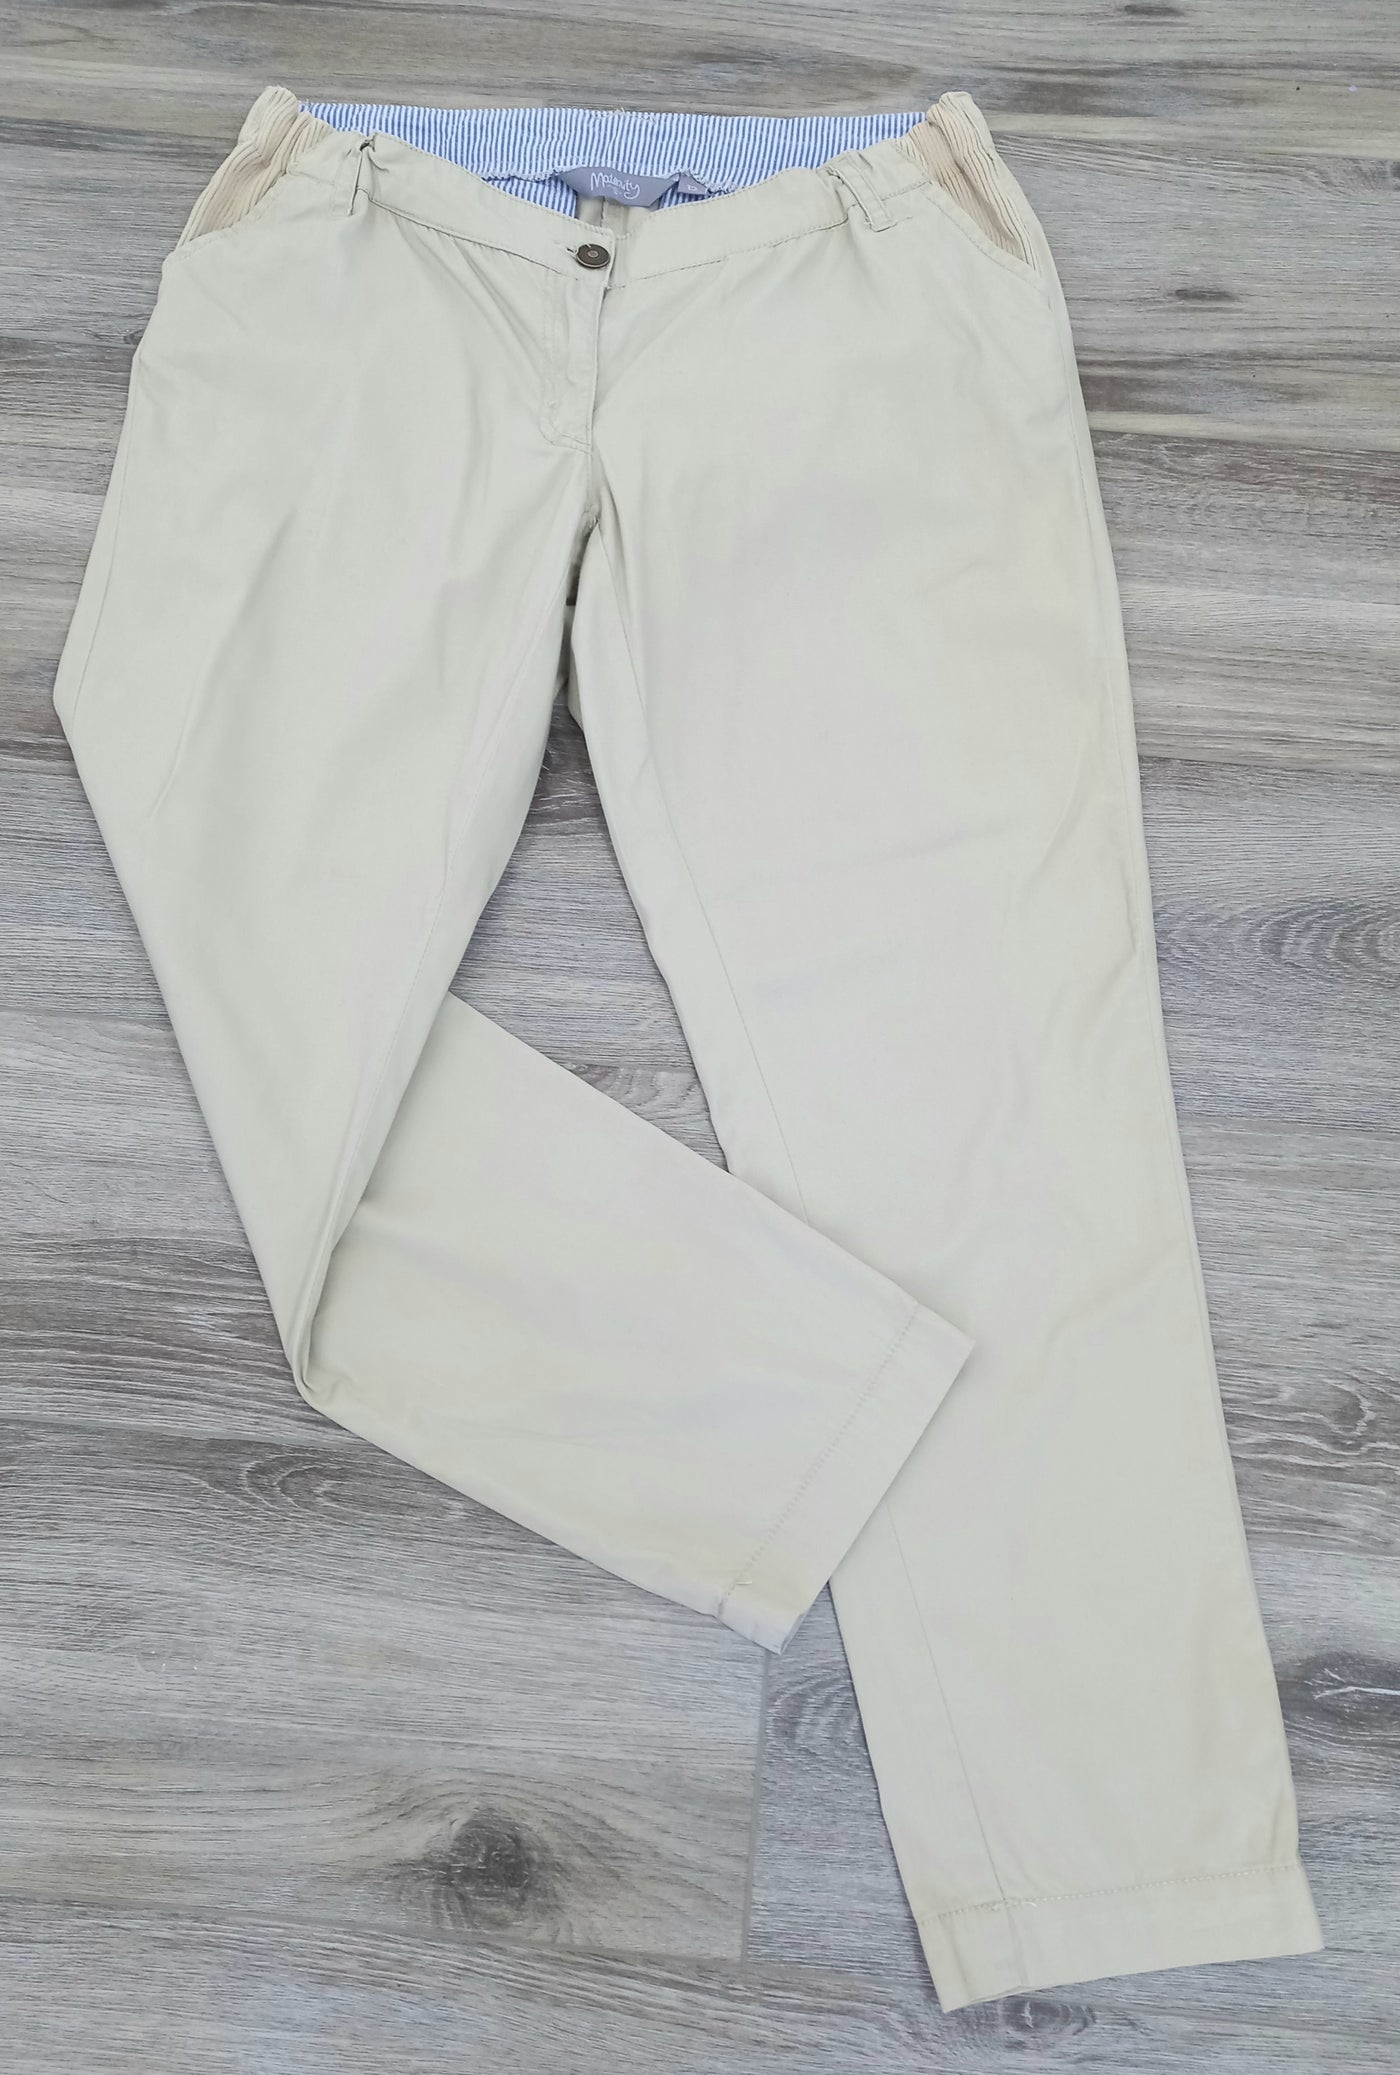 New Look Maternity Stone Chino Style Trousers - Size 12